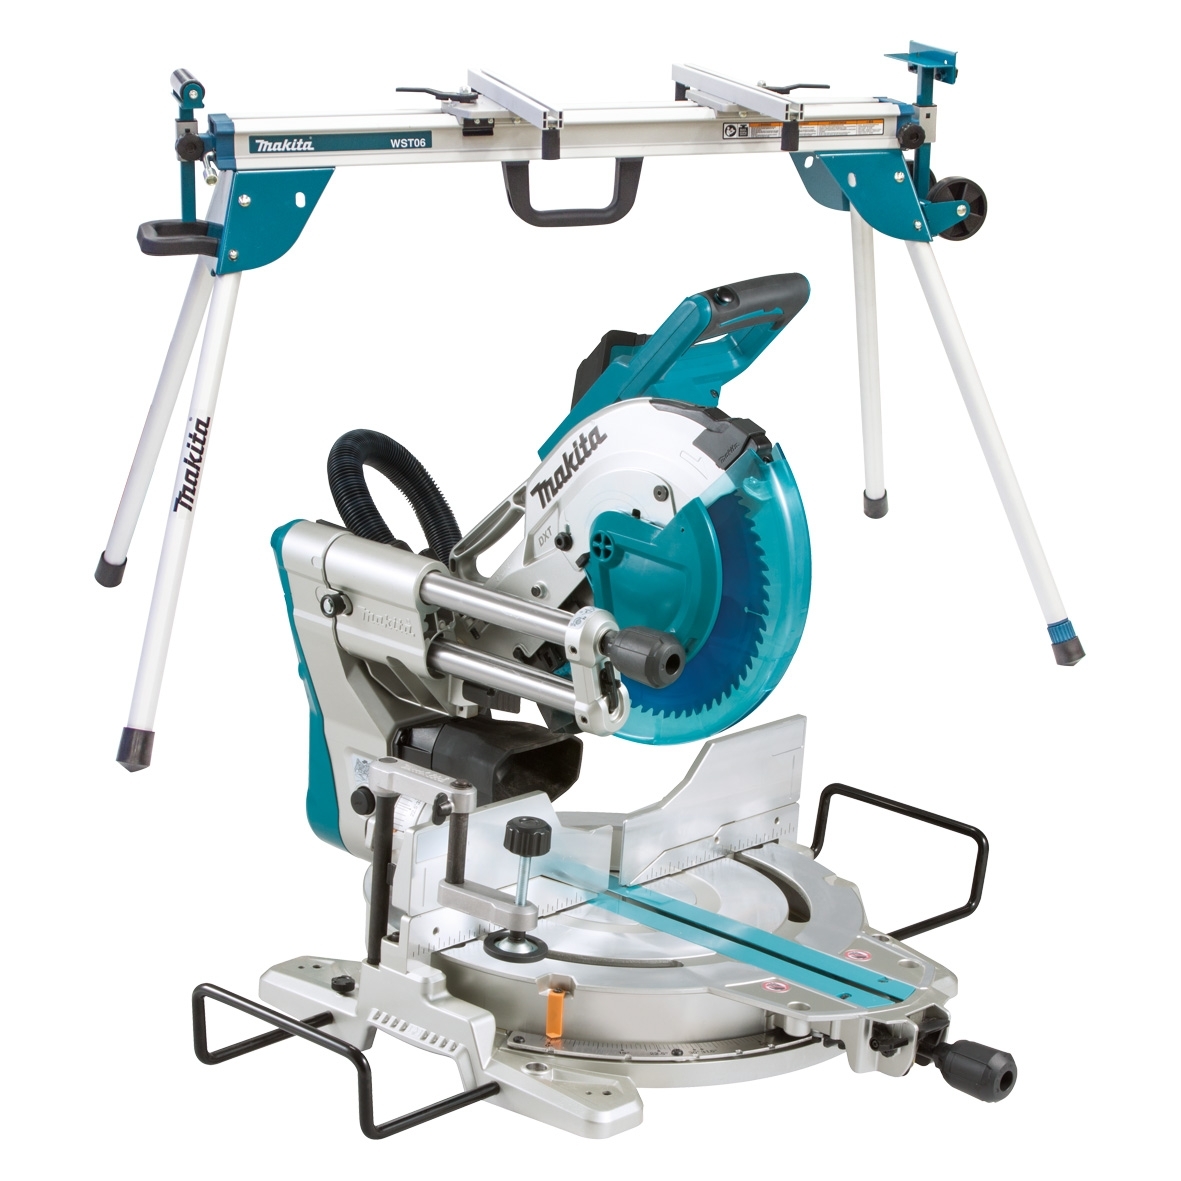 Makita 1510W 260mm Slide Compound Mitre Saw with Mitre Saw Stand Combo LS1019-AWST06